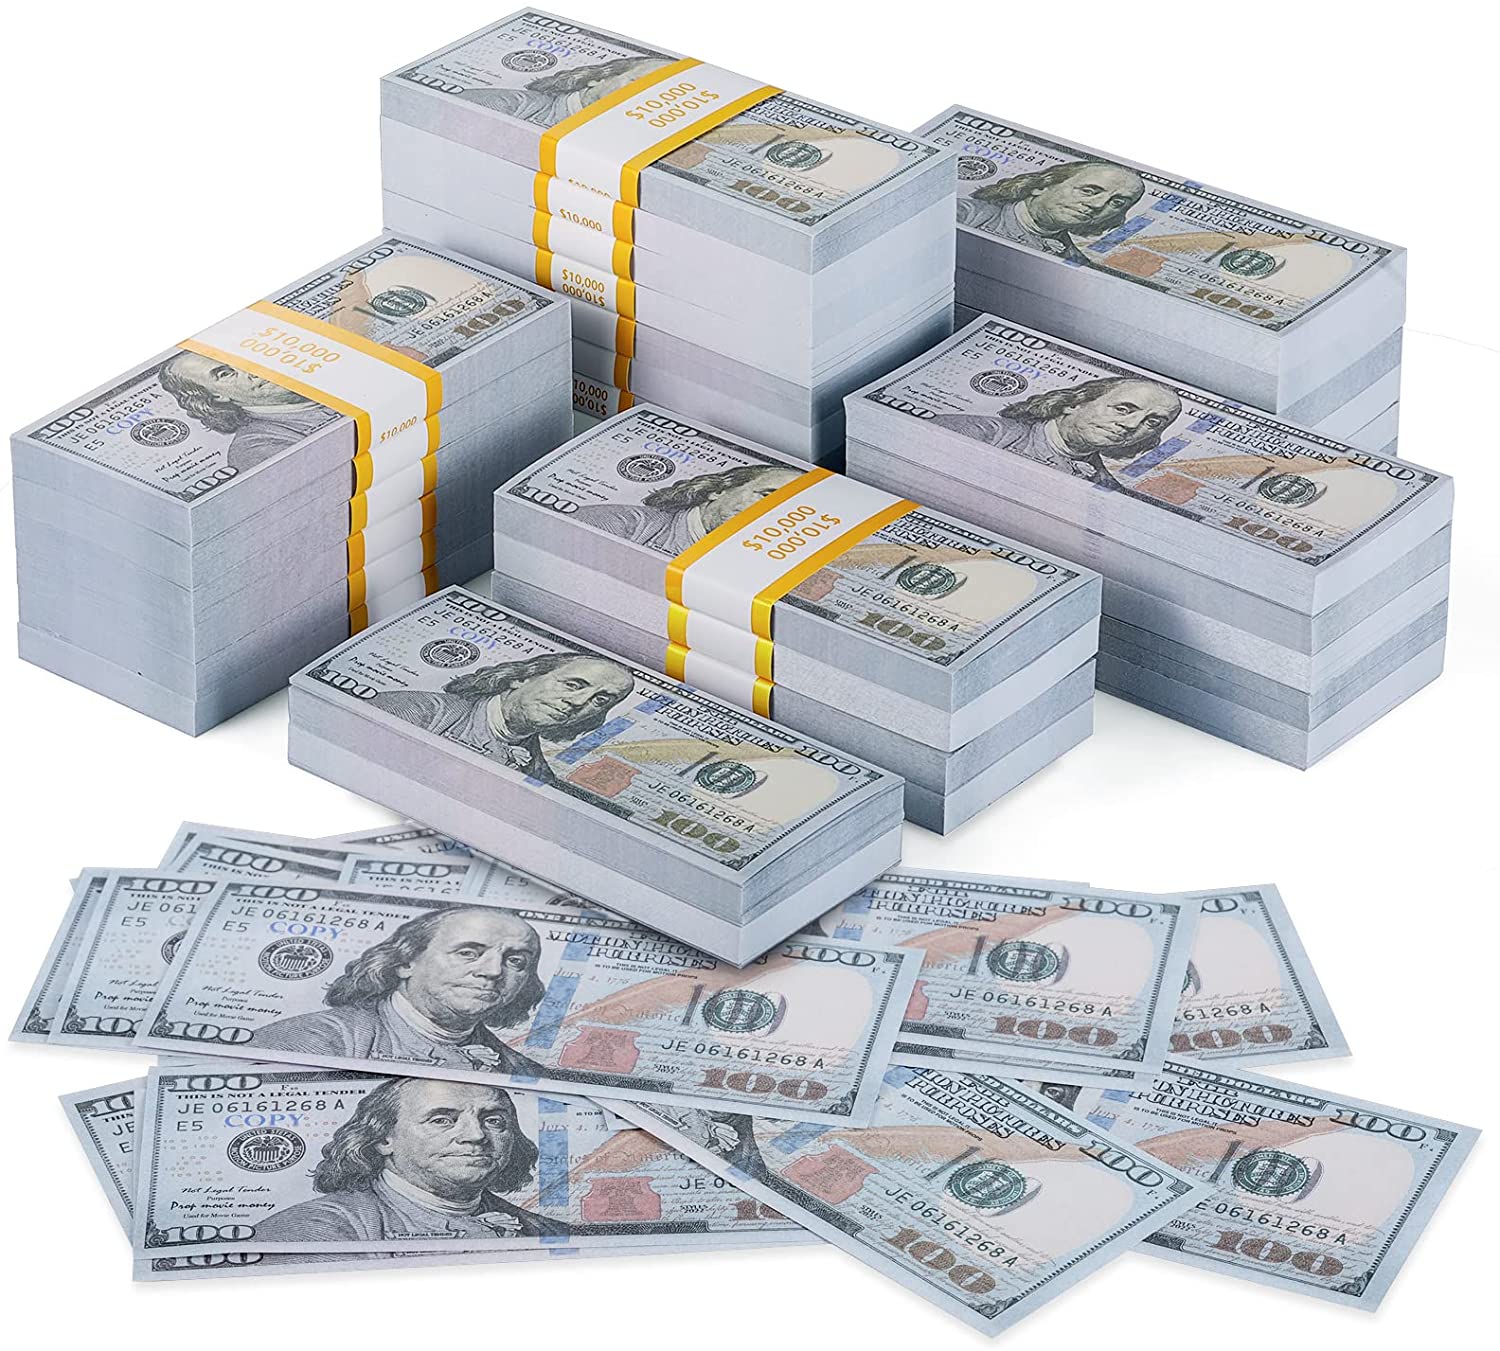 DenYorkStore Copy 500 Euro Bills Realistic, Play Money One Stack 100 Pcs  for Movie Props Pr op Mon ey : Toys & Games 